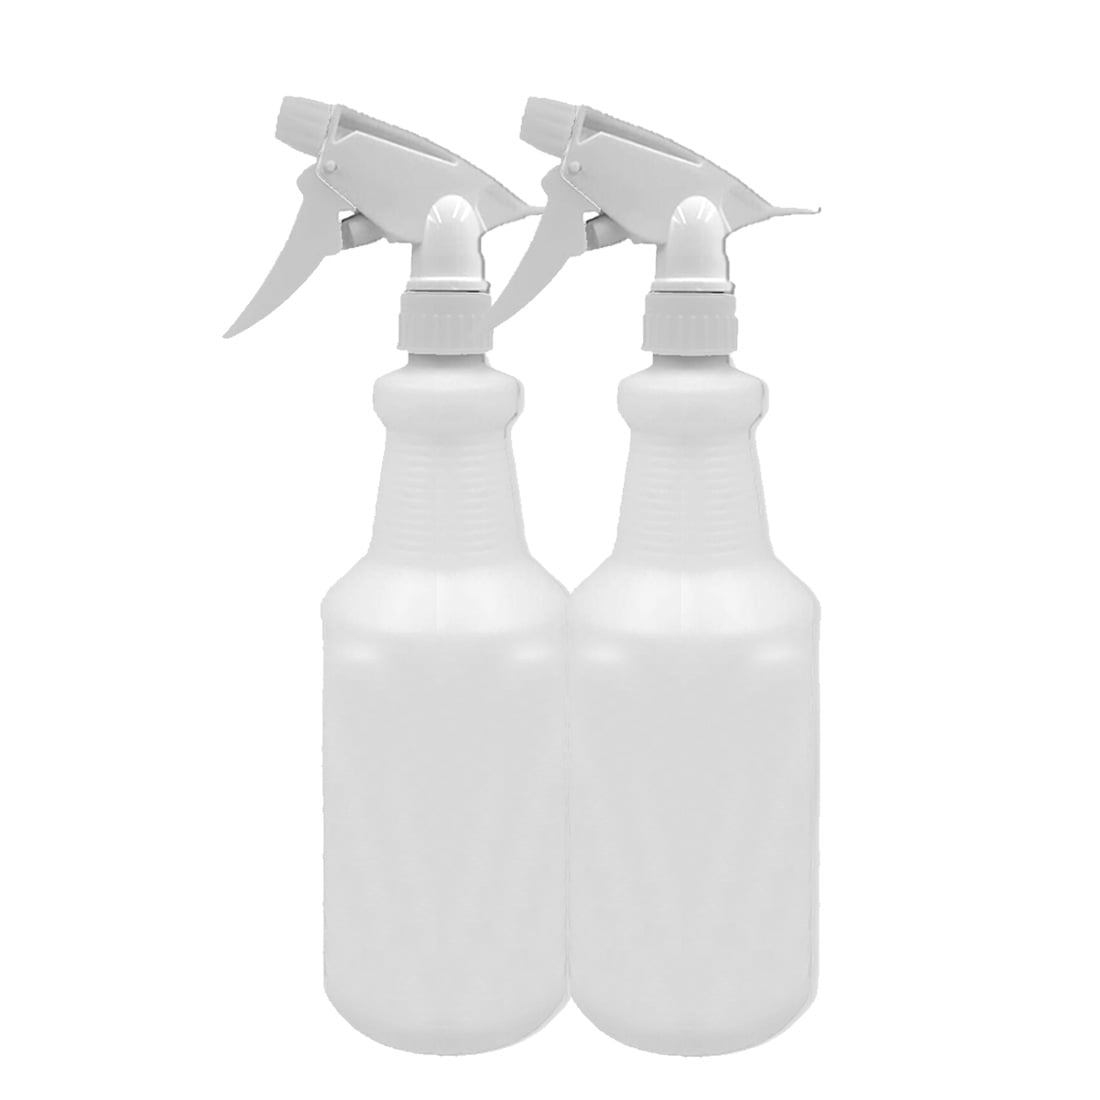 Empty Bottles Natural Cylindrical HDPE 1L 5 Pack Various Spray Heads 